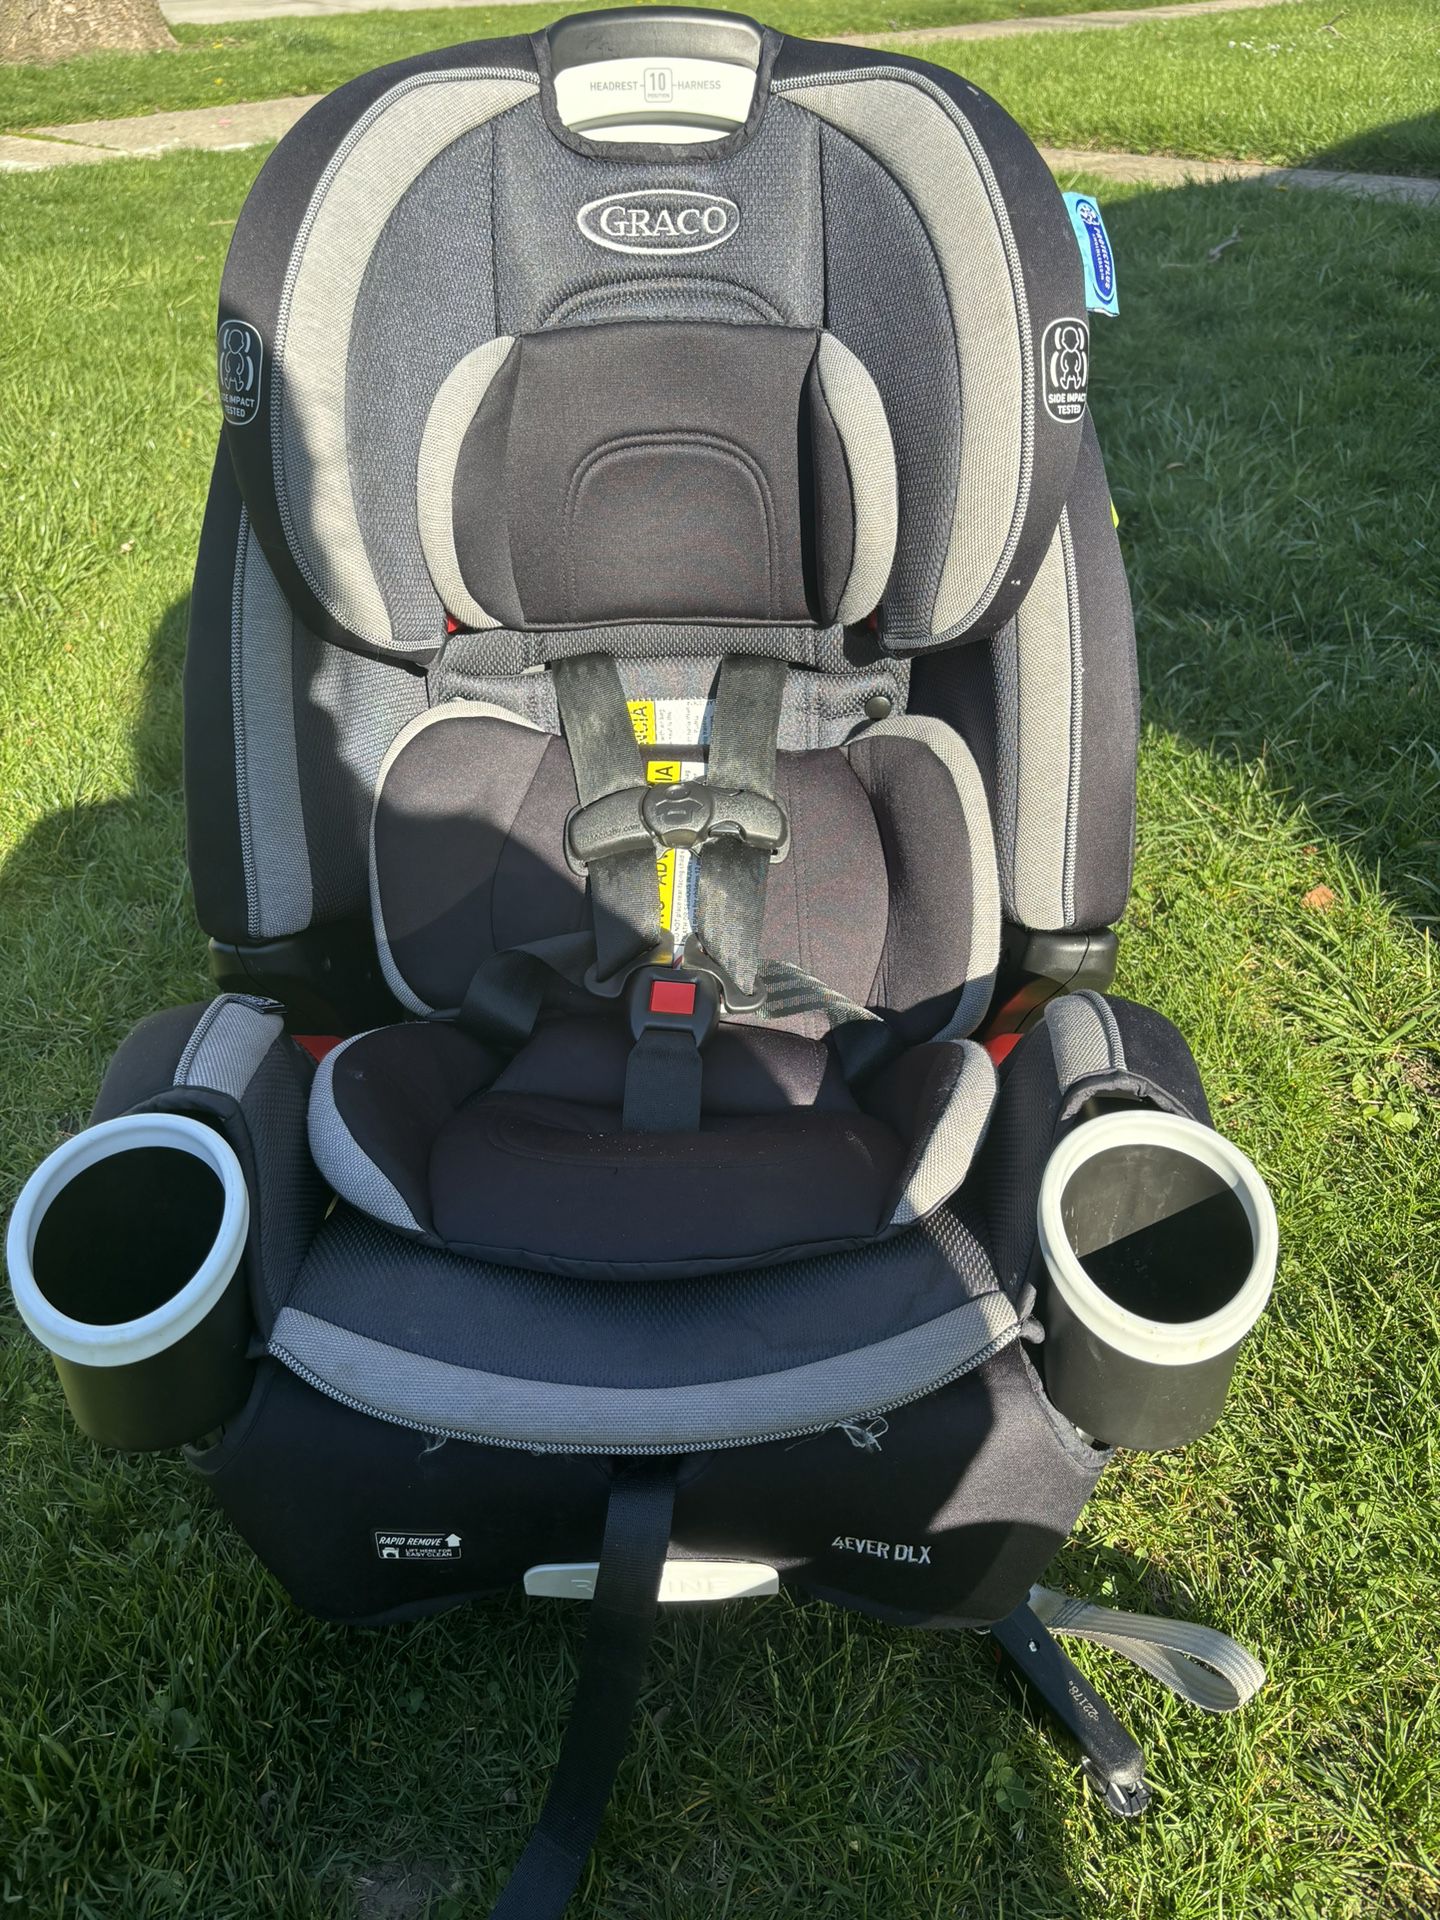 Graco forever deluxe car seat